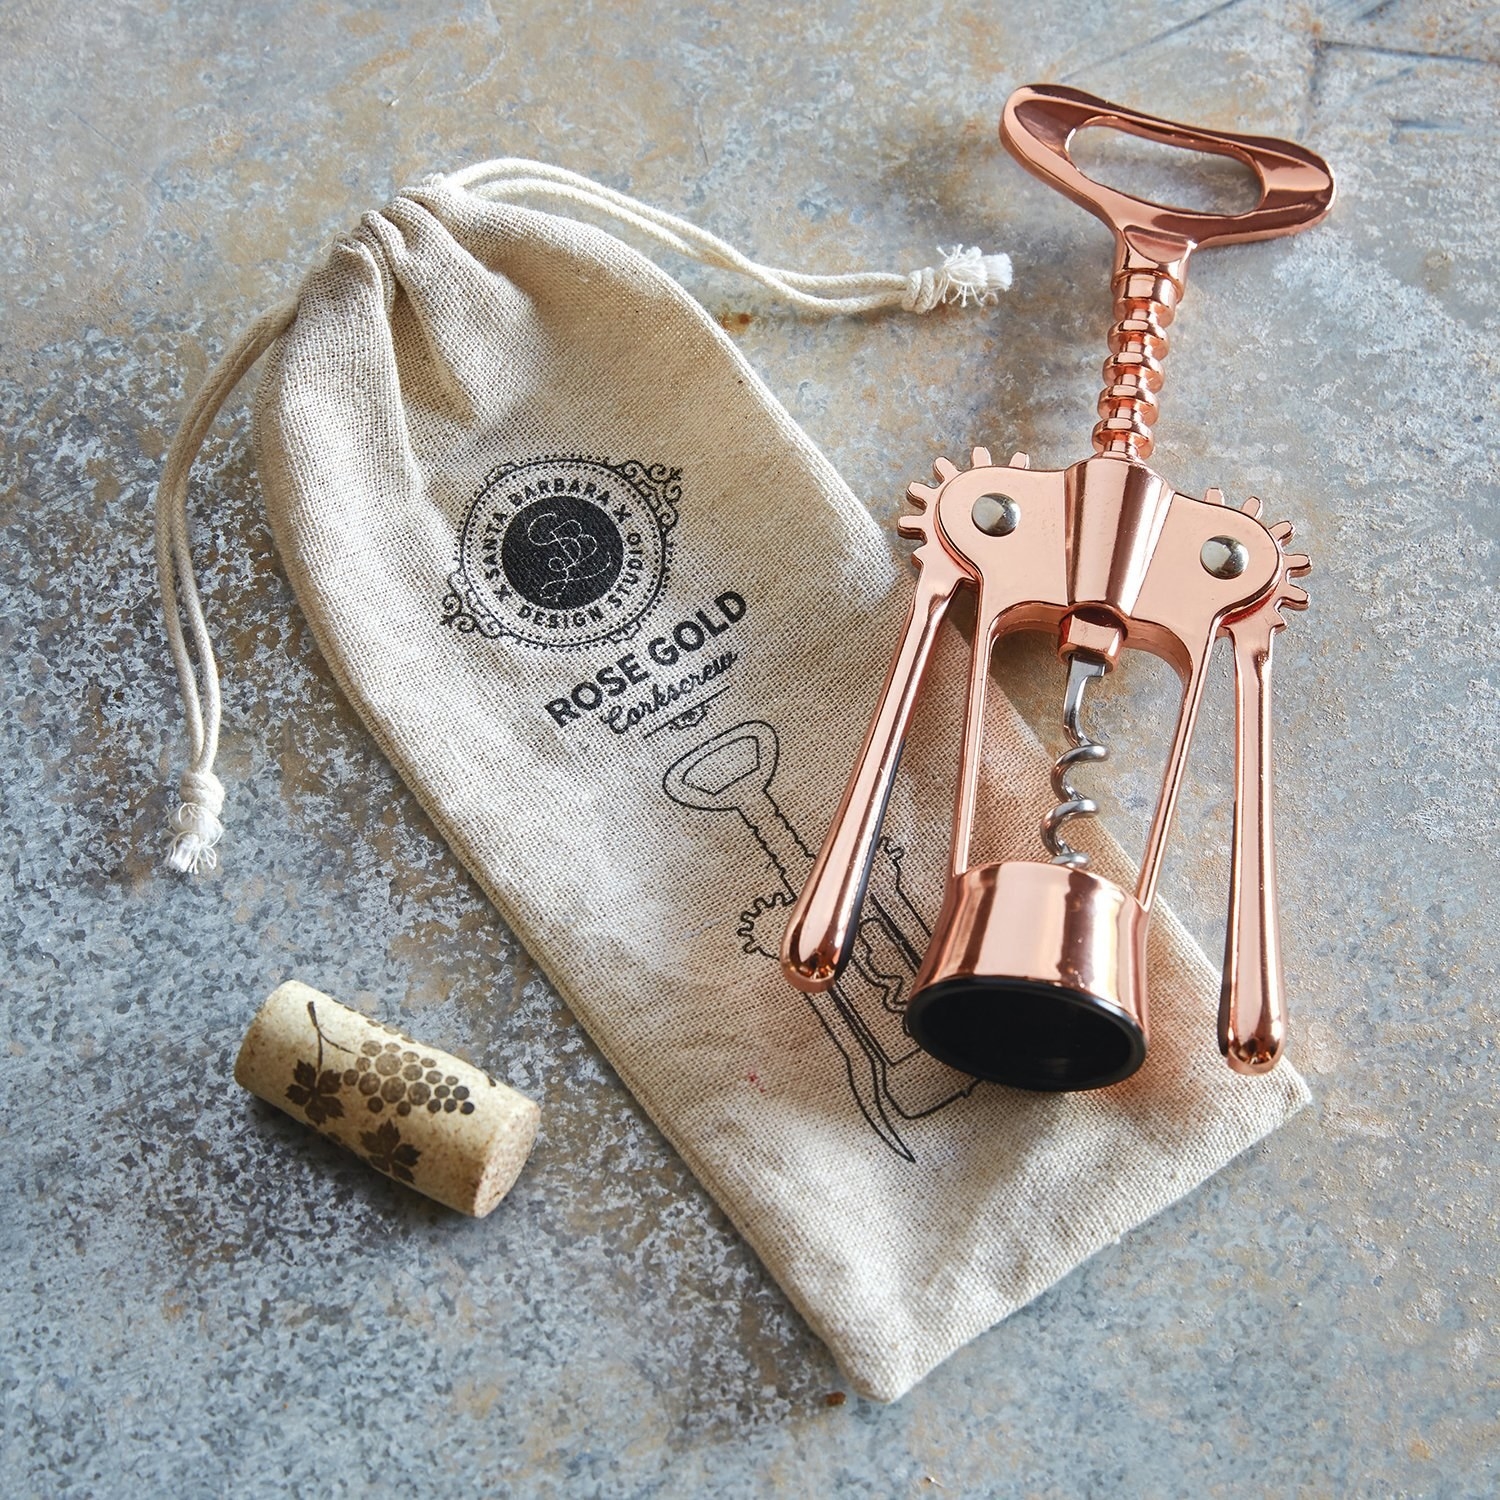 A corkscrew lying flat with a carrying bag and a cork